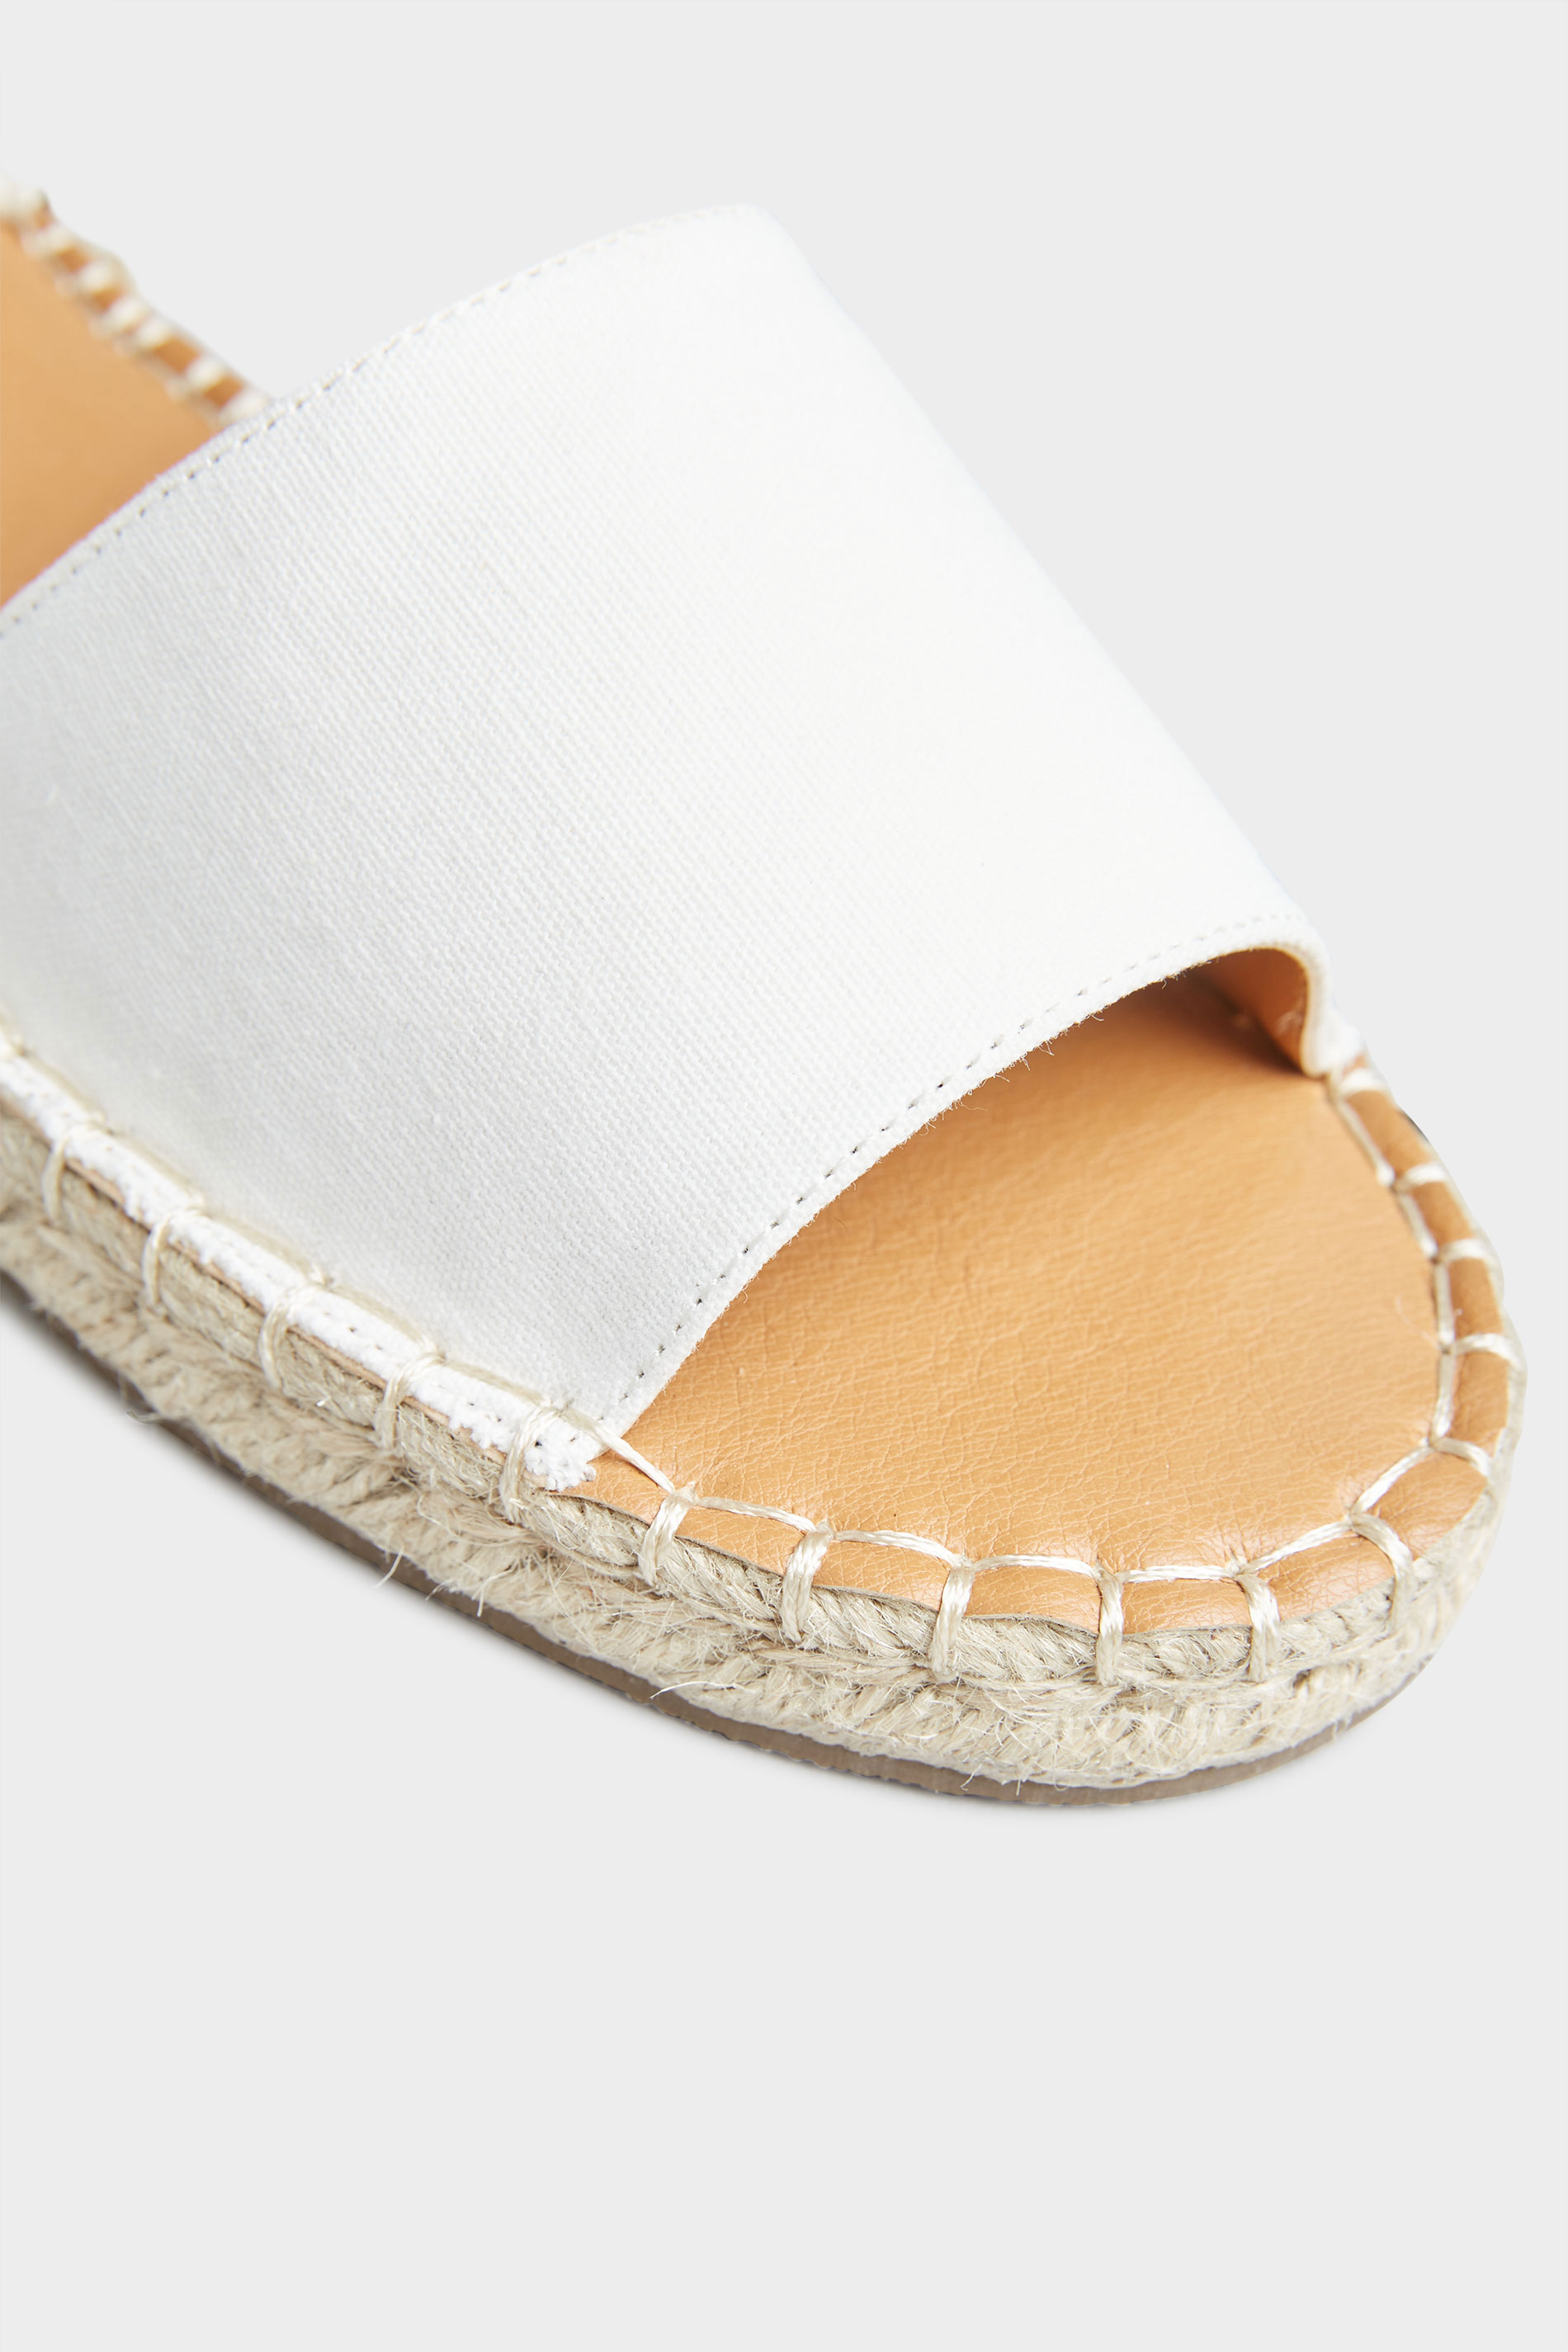 LTS Off-White Open Toe Espadrilles In Standard D Fit | Long Tall Sally